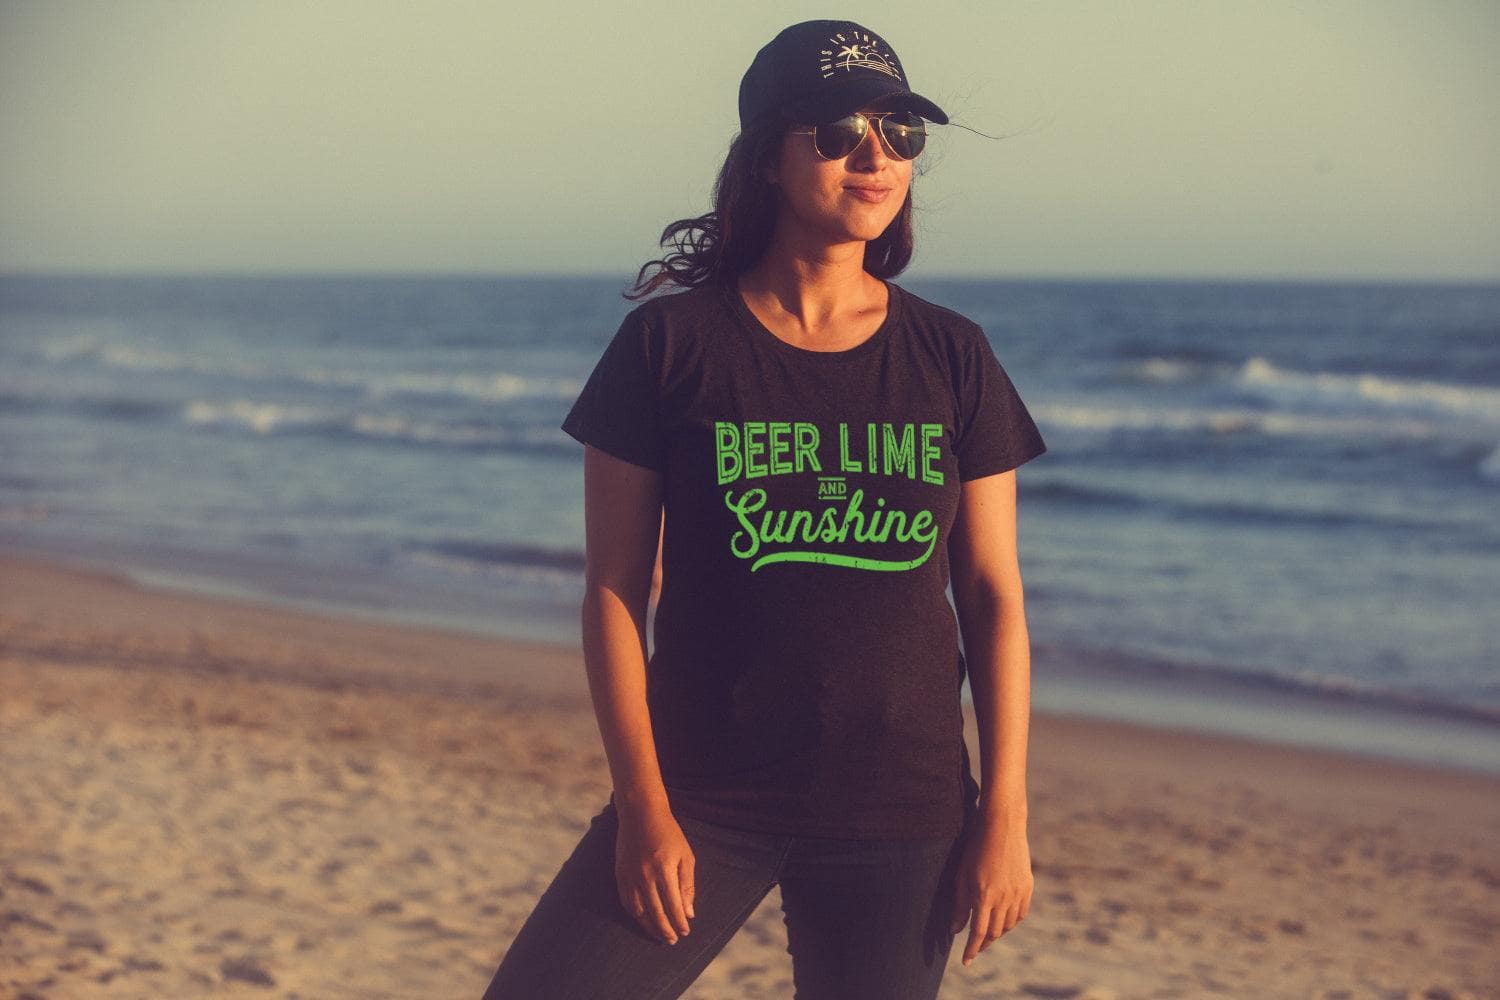 Beer Lime and Sunshine Women's Tshirt  -  Crazy Dog T-Shirts